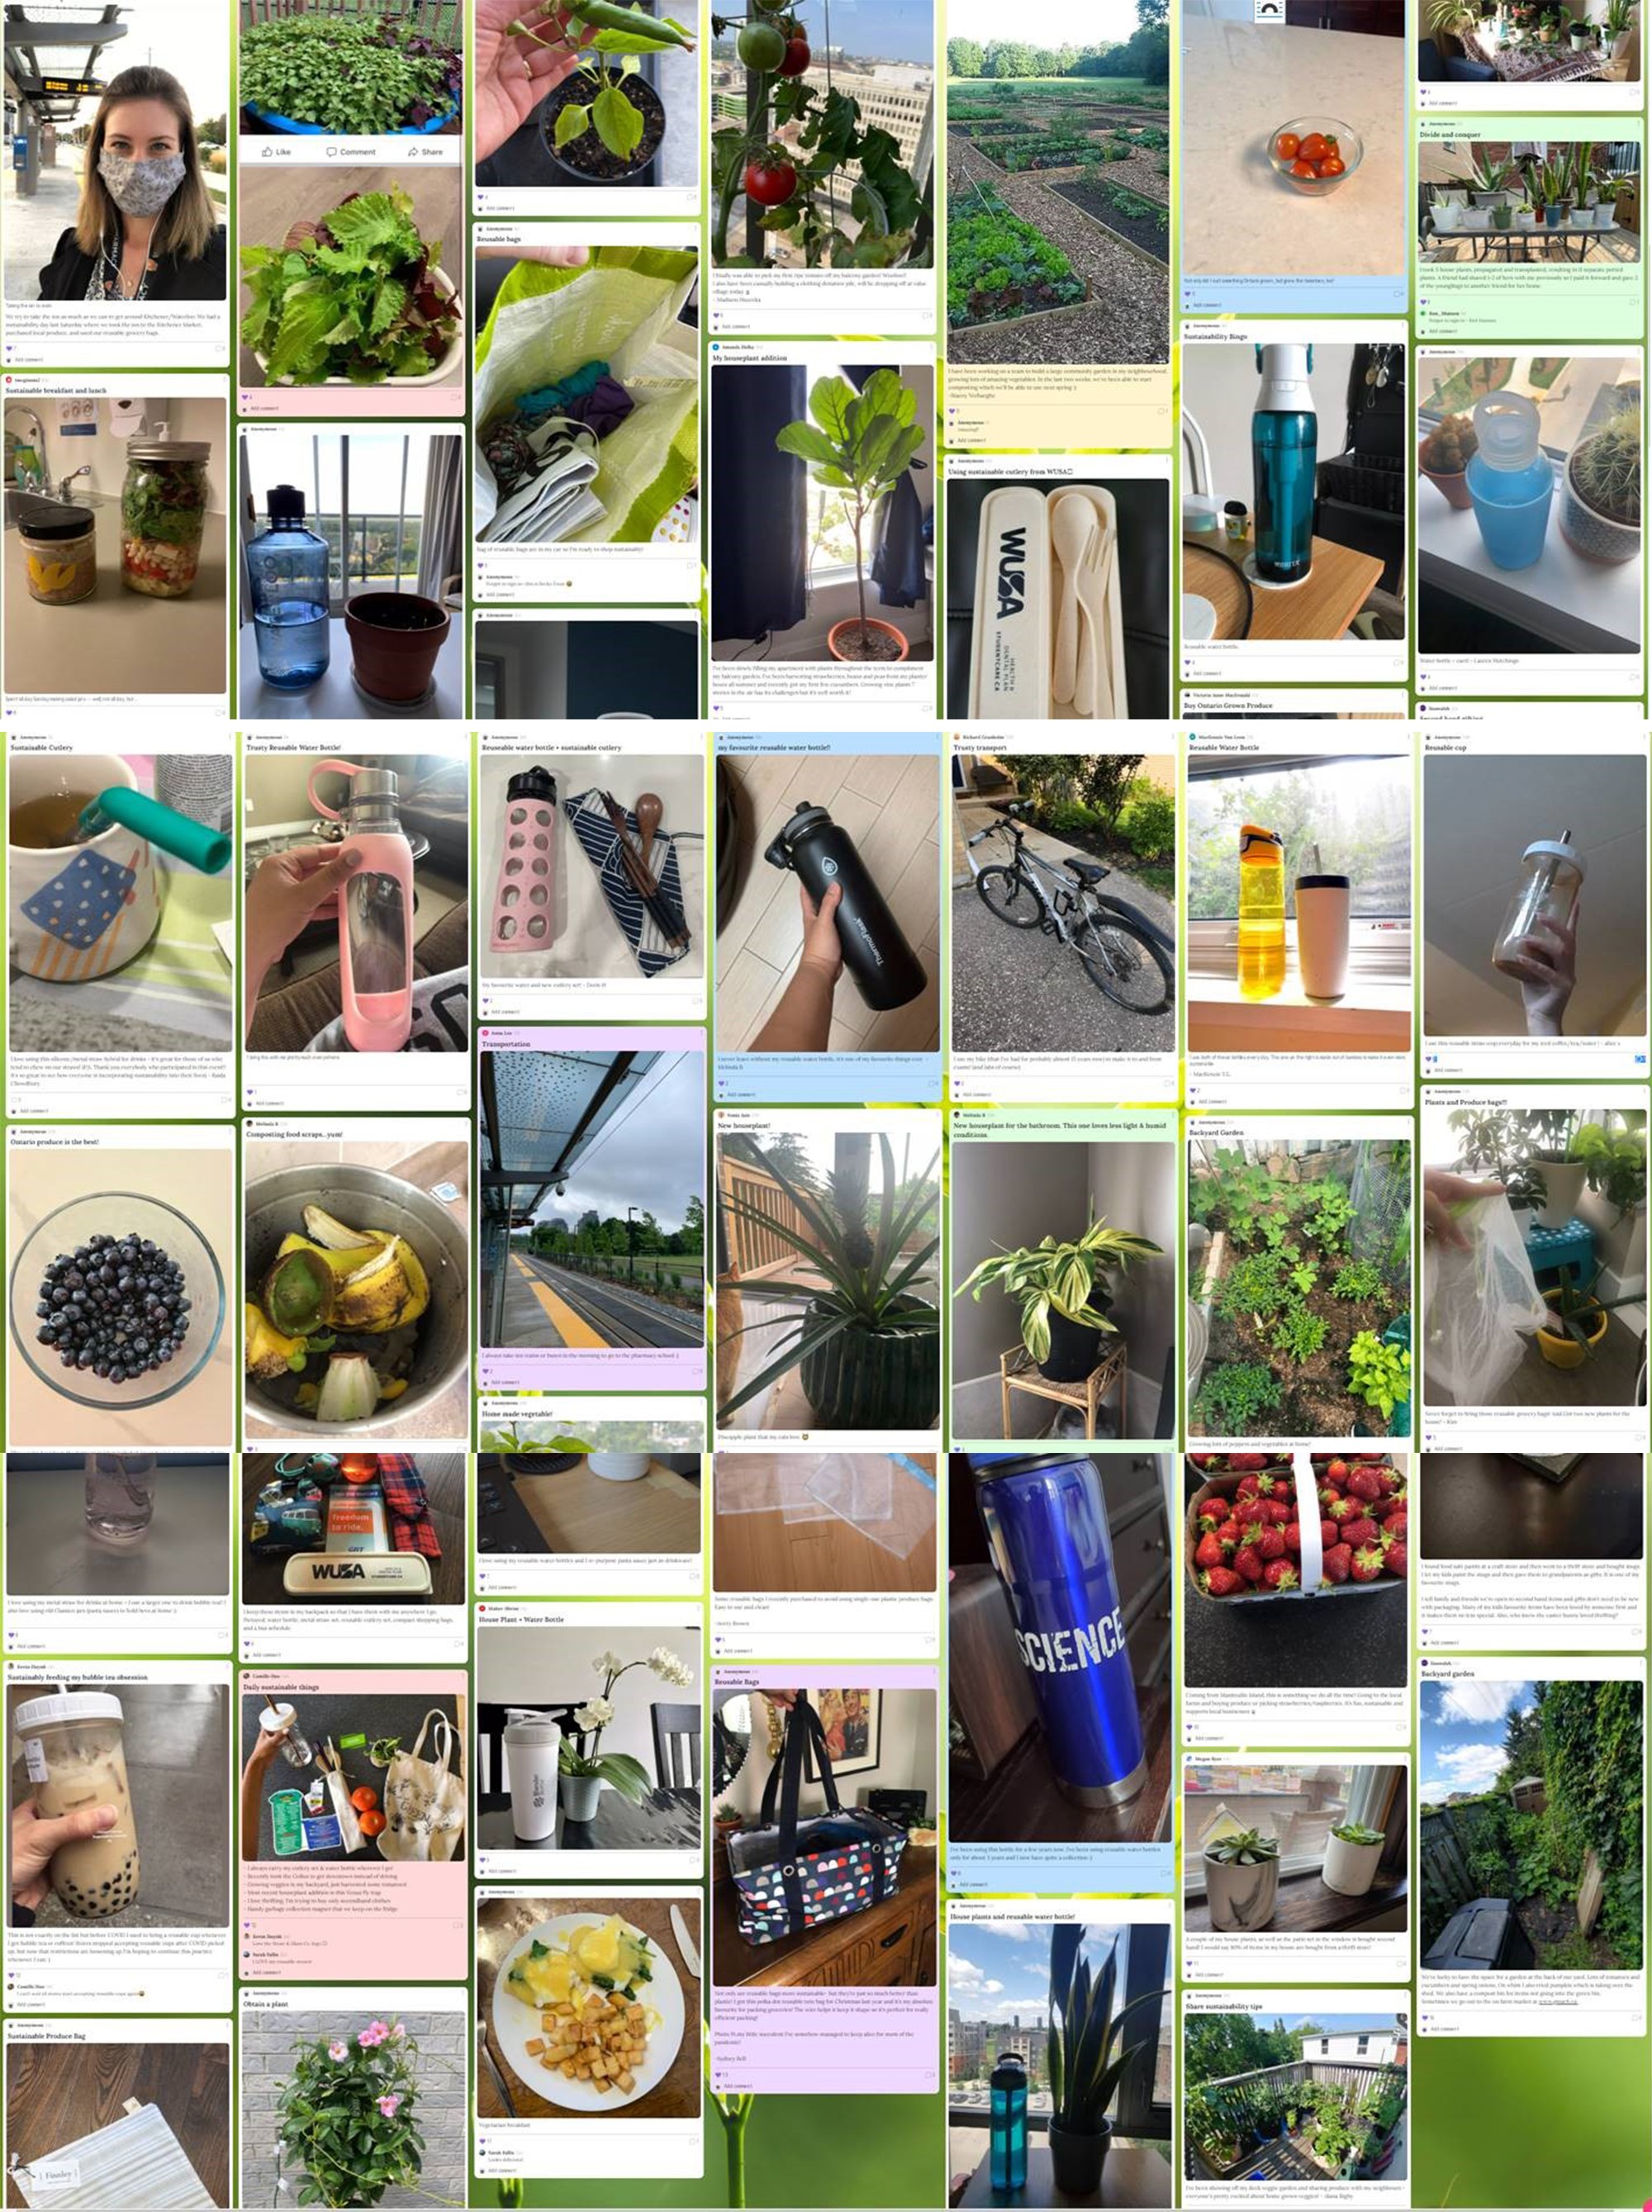 Submitted photos of gardens, water bottles and other sustainable actions